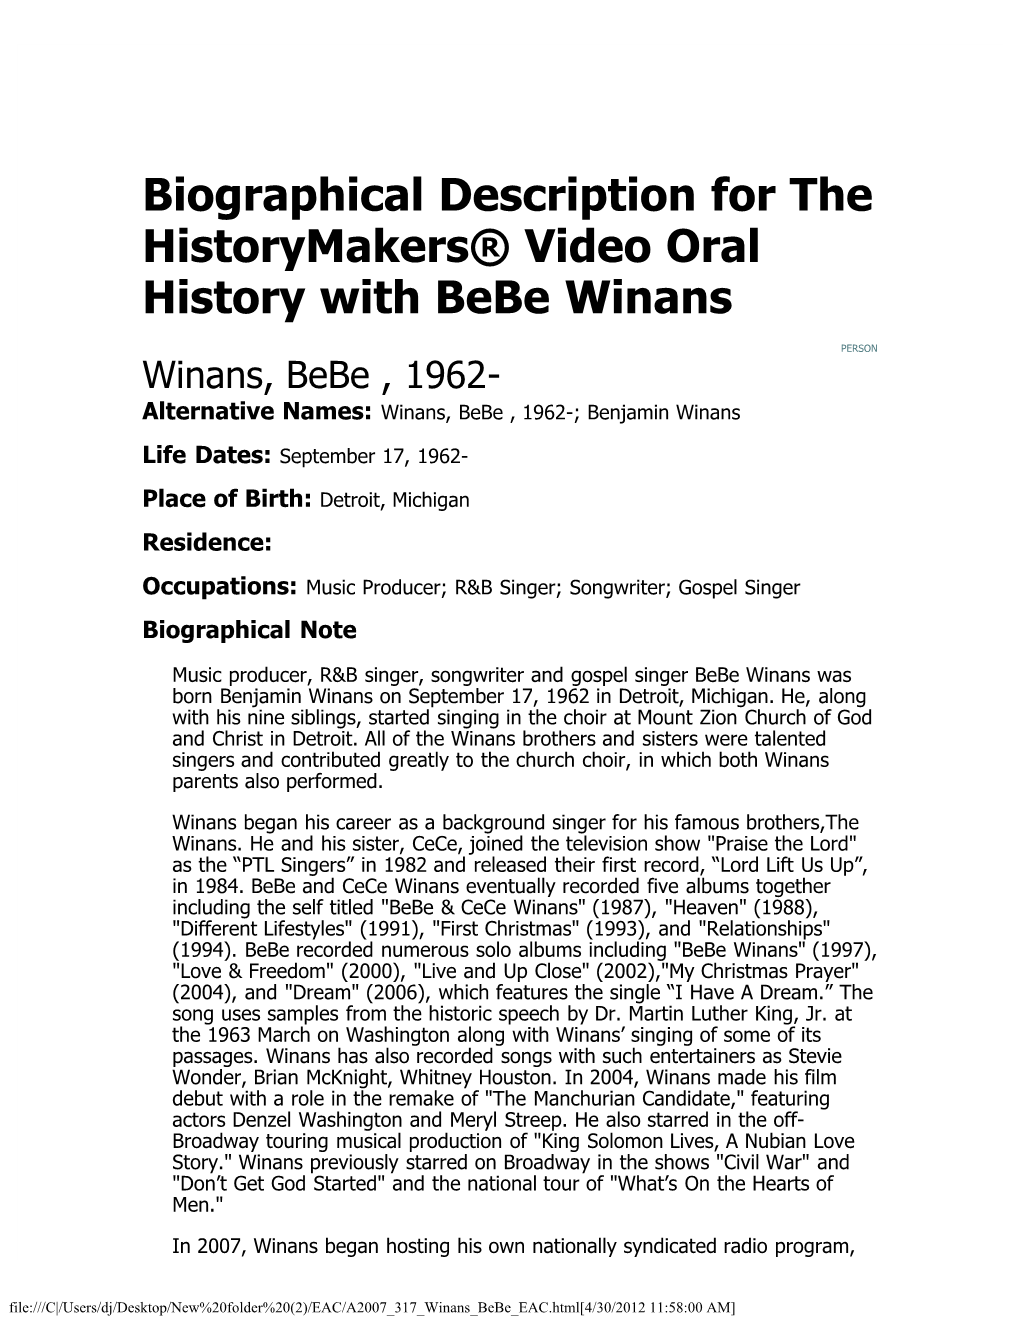 Biographical Description for the Historymakers® Video Oral History with Bebe Winans